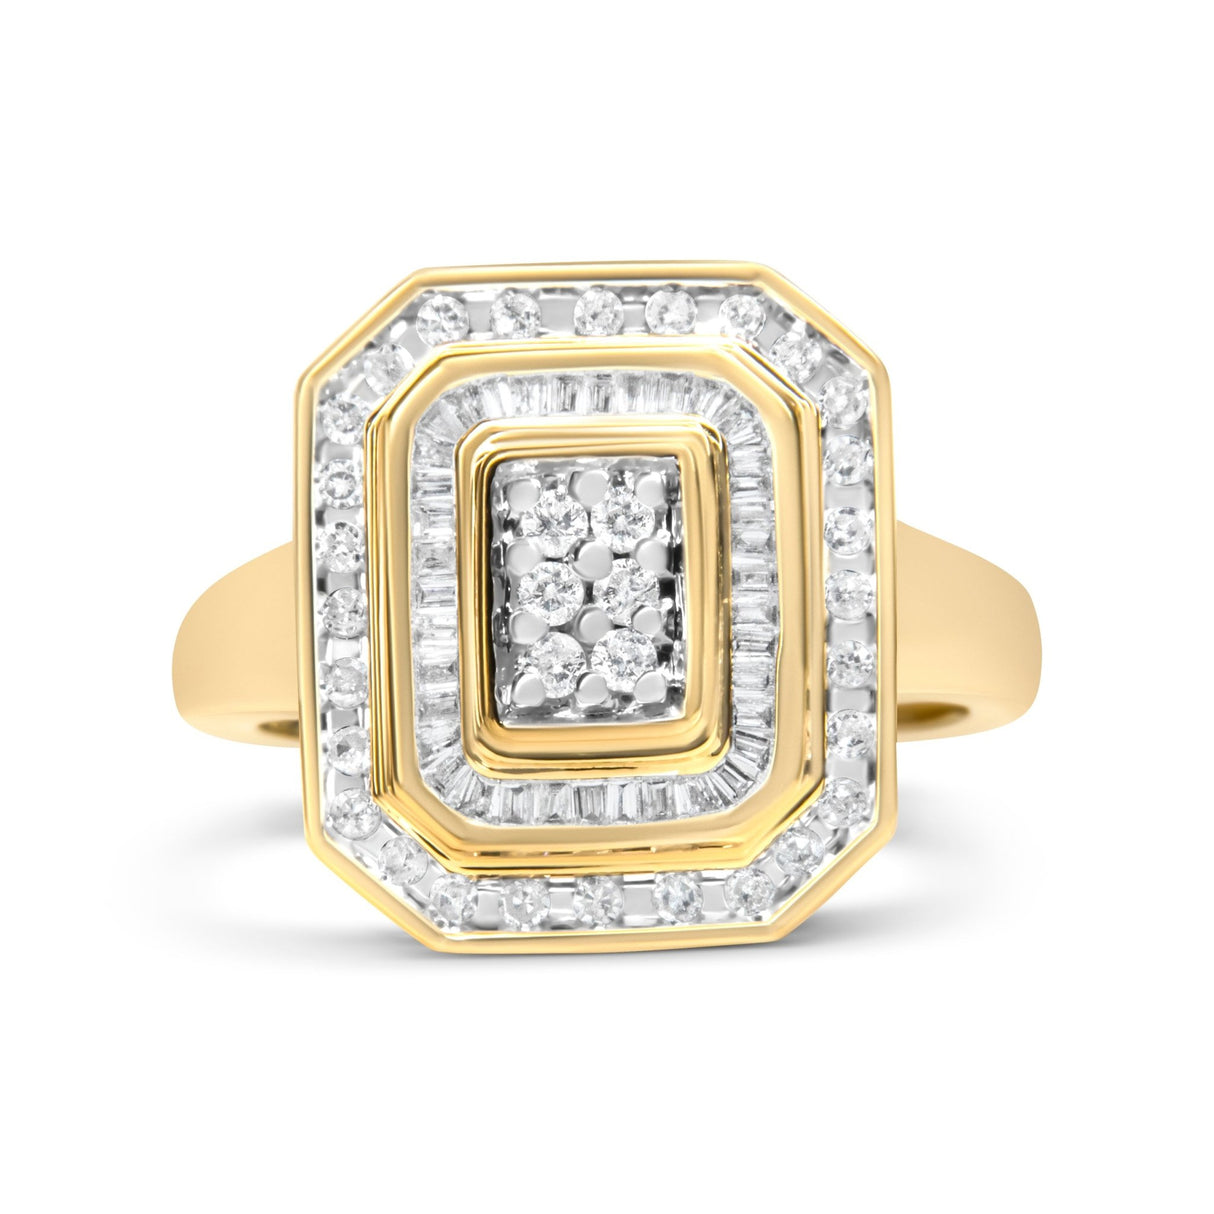 10K Yellow Gold 1.0 Cttw Diamond Vintage Inspired Baguette-Cut Double Halo Emerald-Shaped Frame Cocktail Ring (I-J Color, I1-I2 Clarity) - Size 8 - Tuesday Morning-Rings